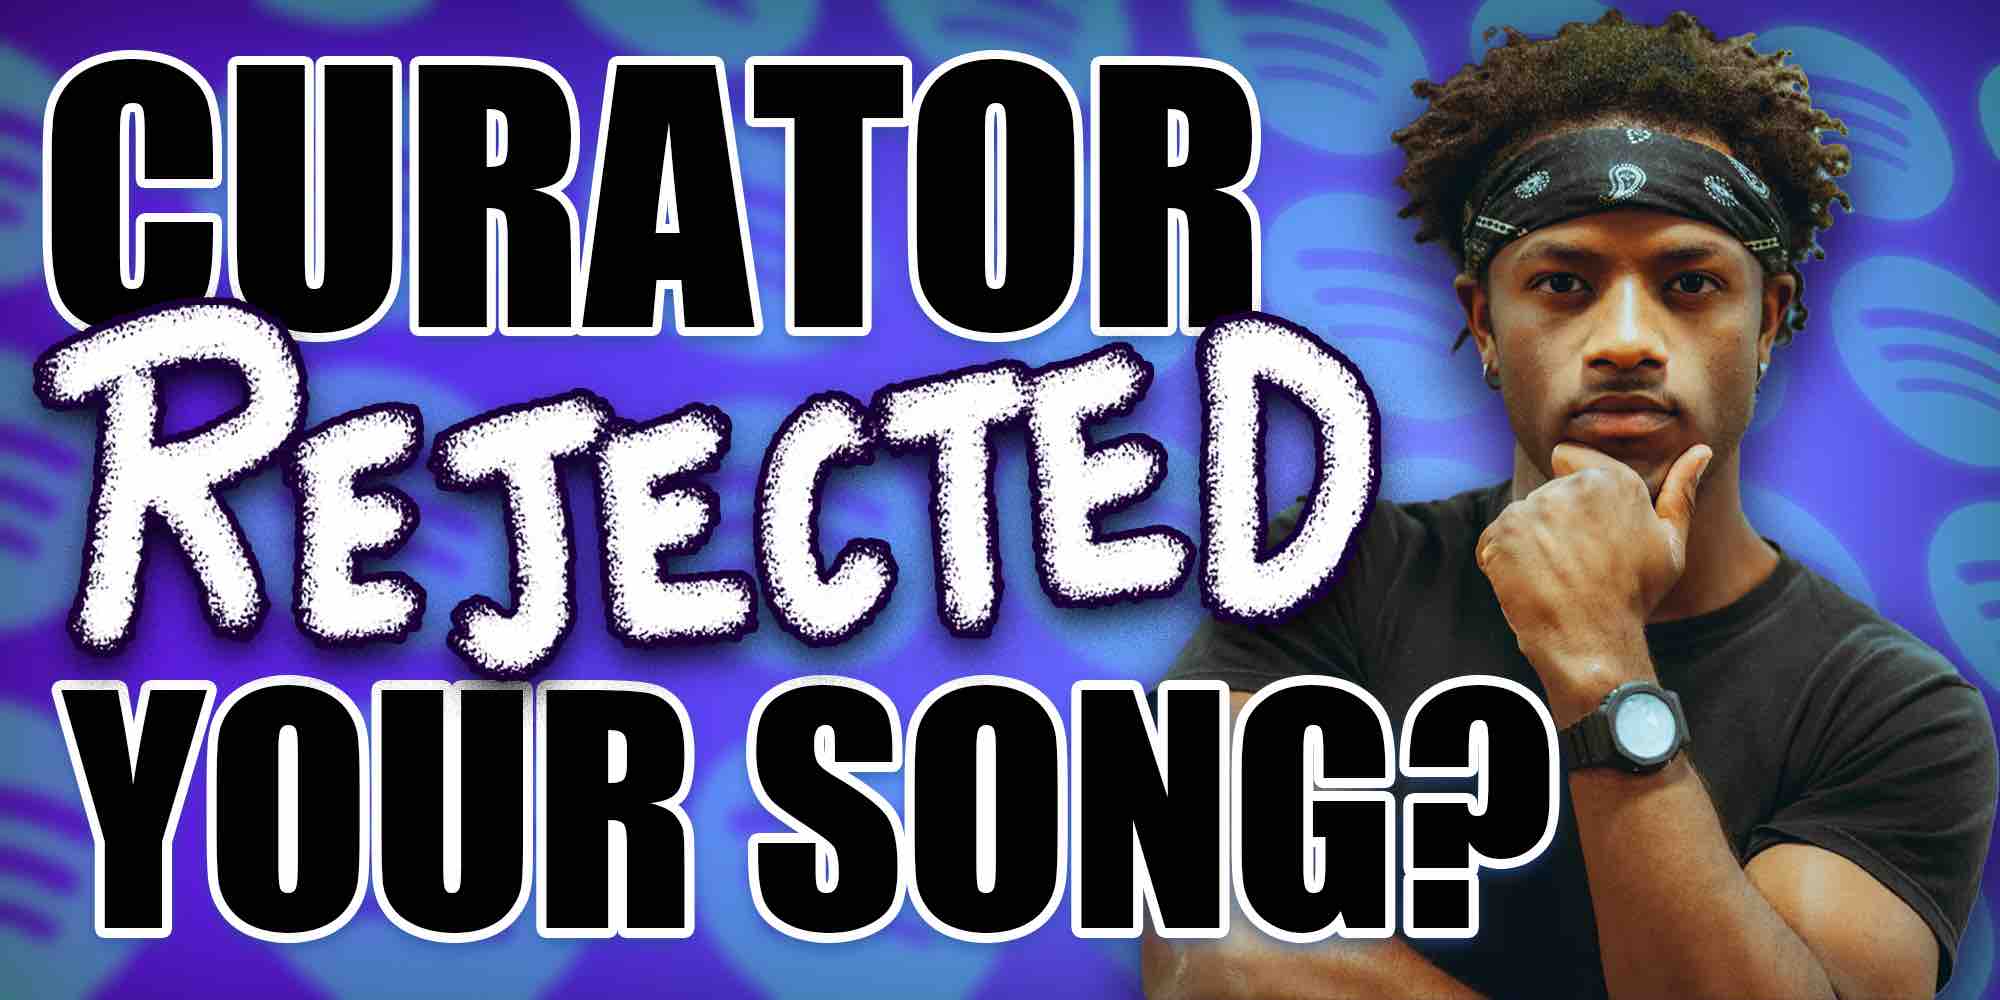 Curator Rejected Your Song